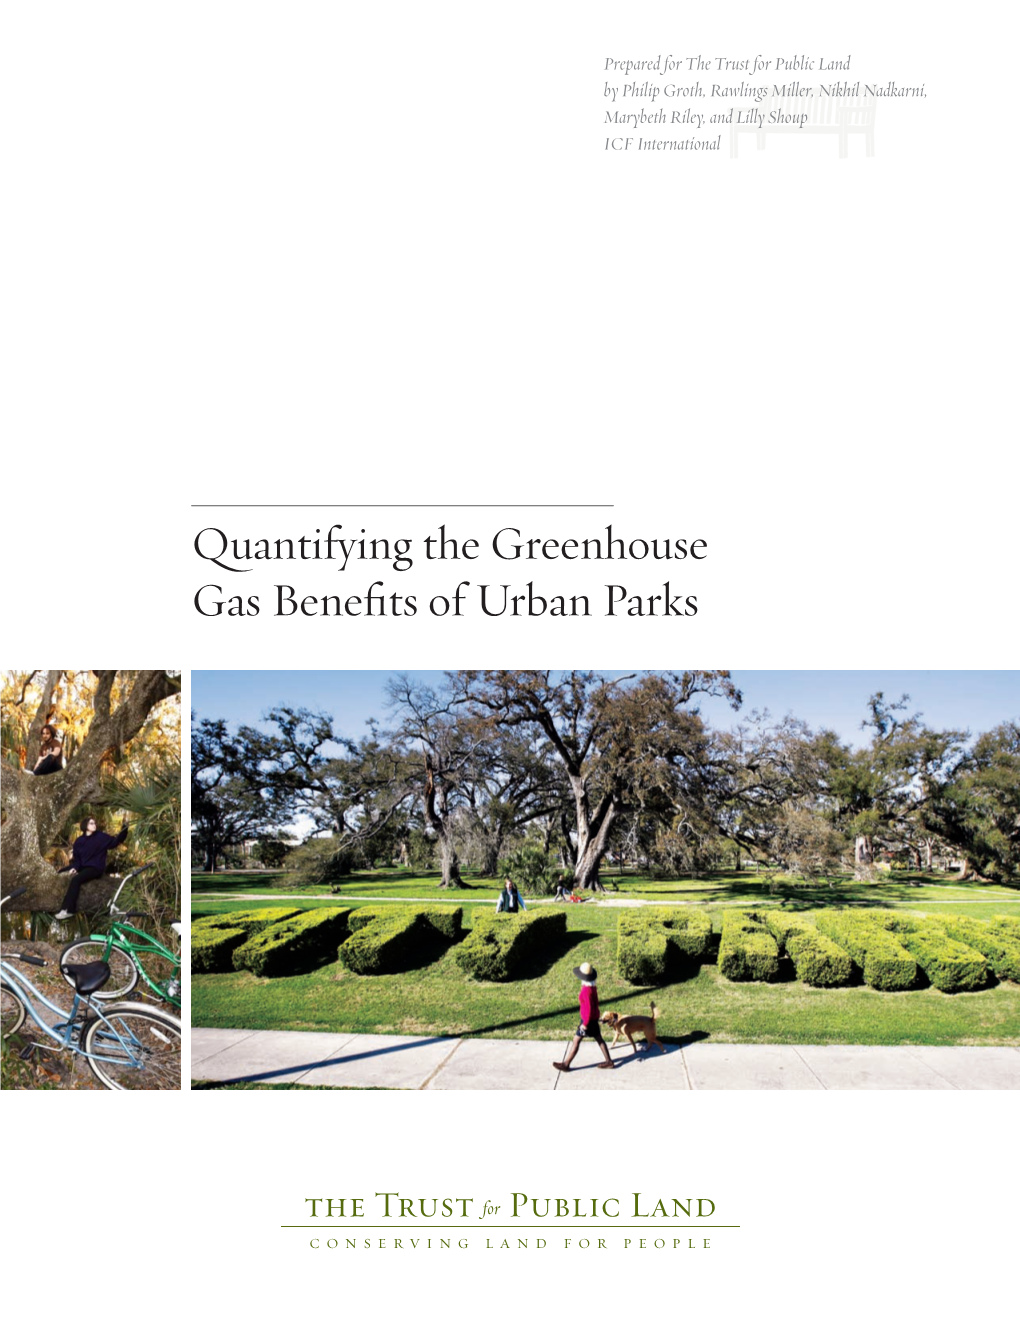 Quantifying the Greenhouse Gas Benefits of Urban Parks